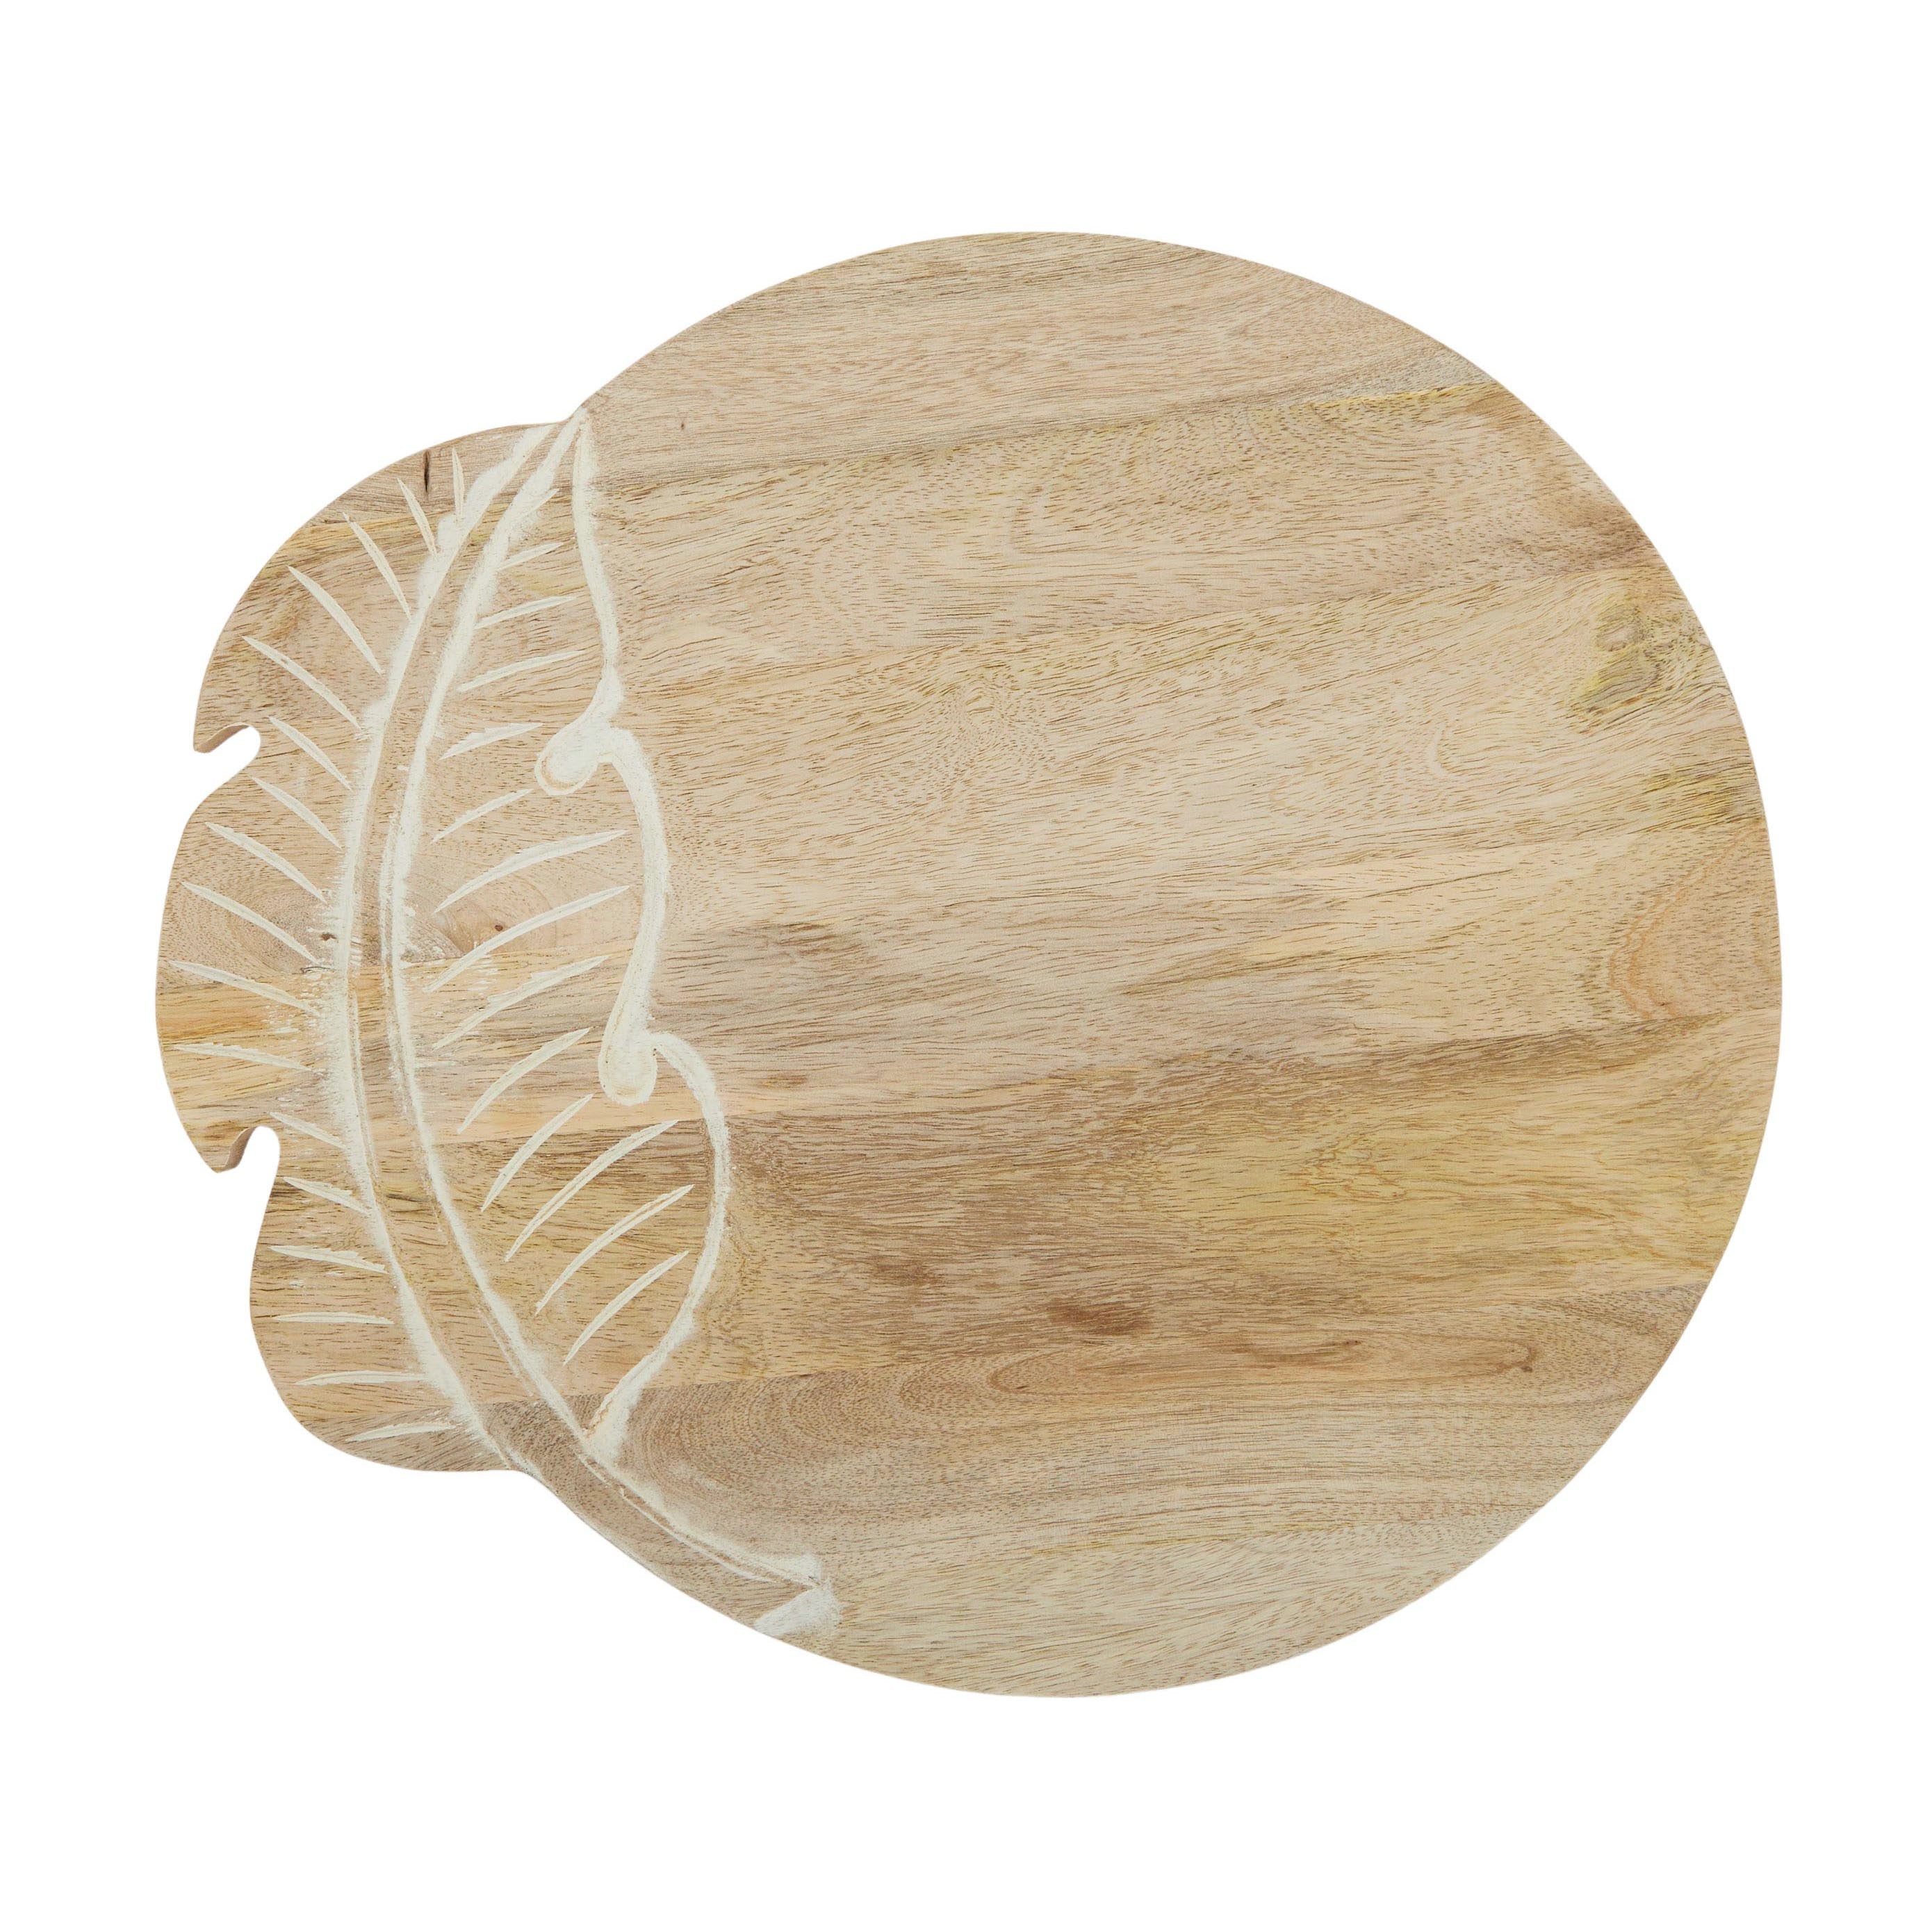 Alajuela Round Wood Board - Natural/White Wash-Dining & Entertaining-Coast To Coast Home-The Bay Room